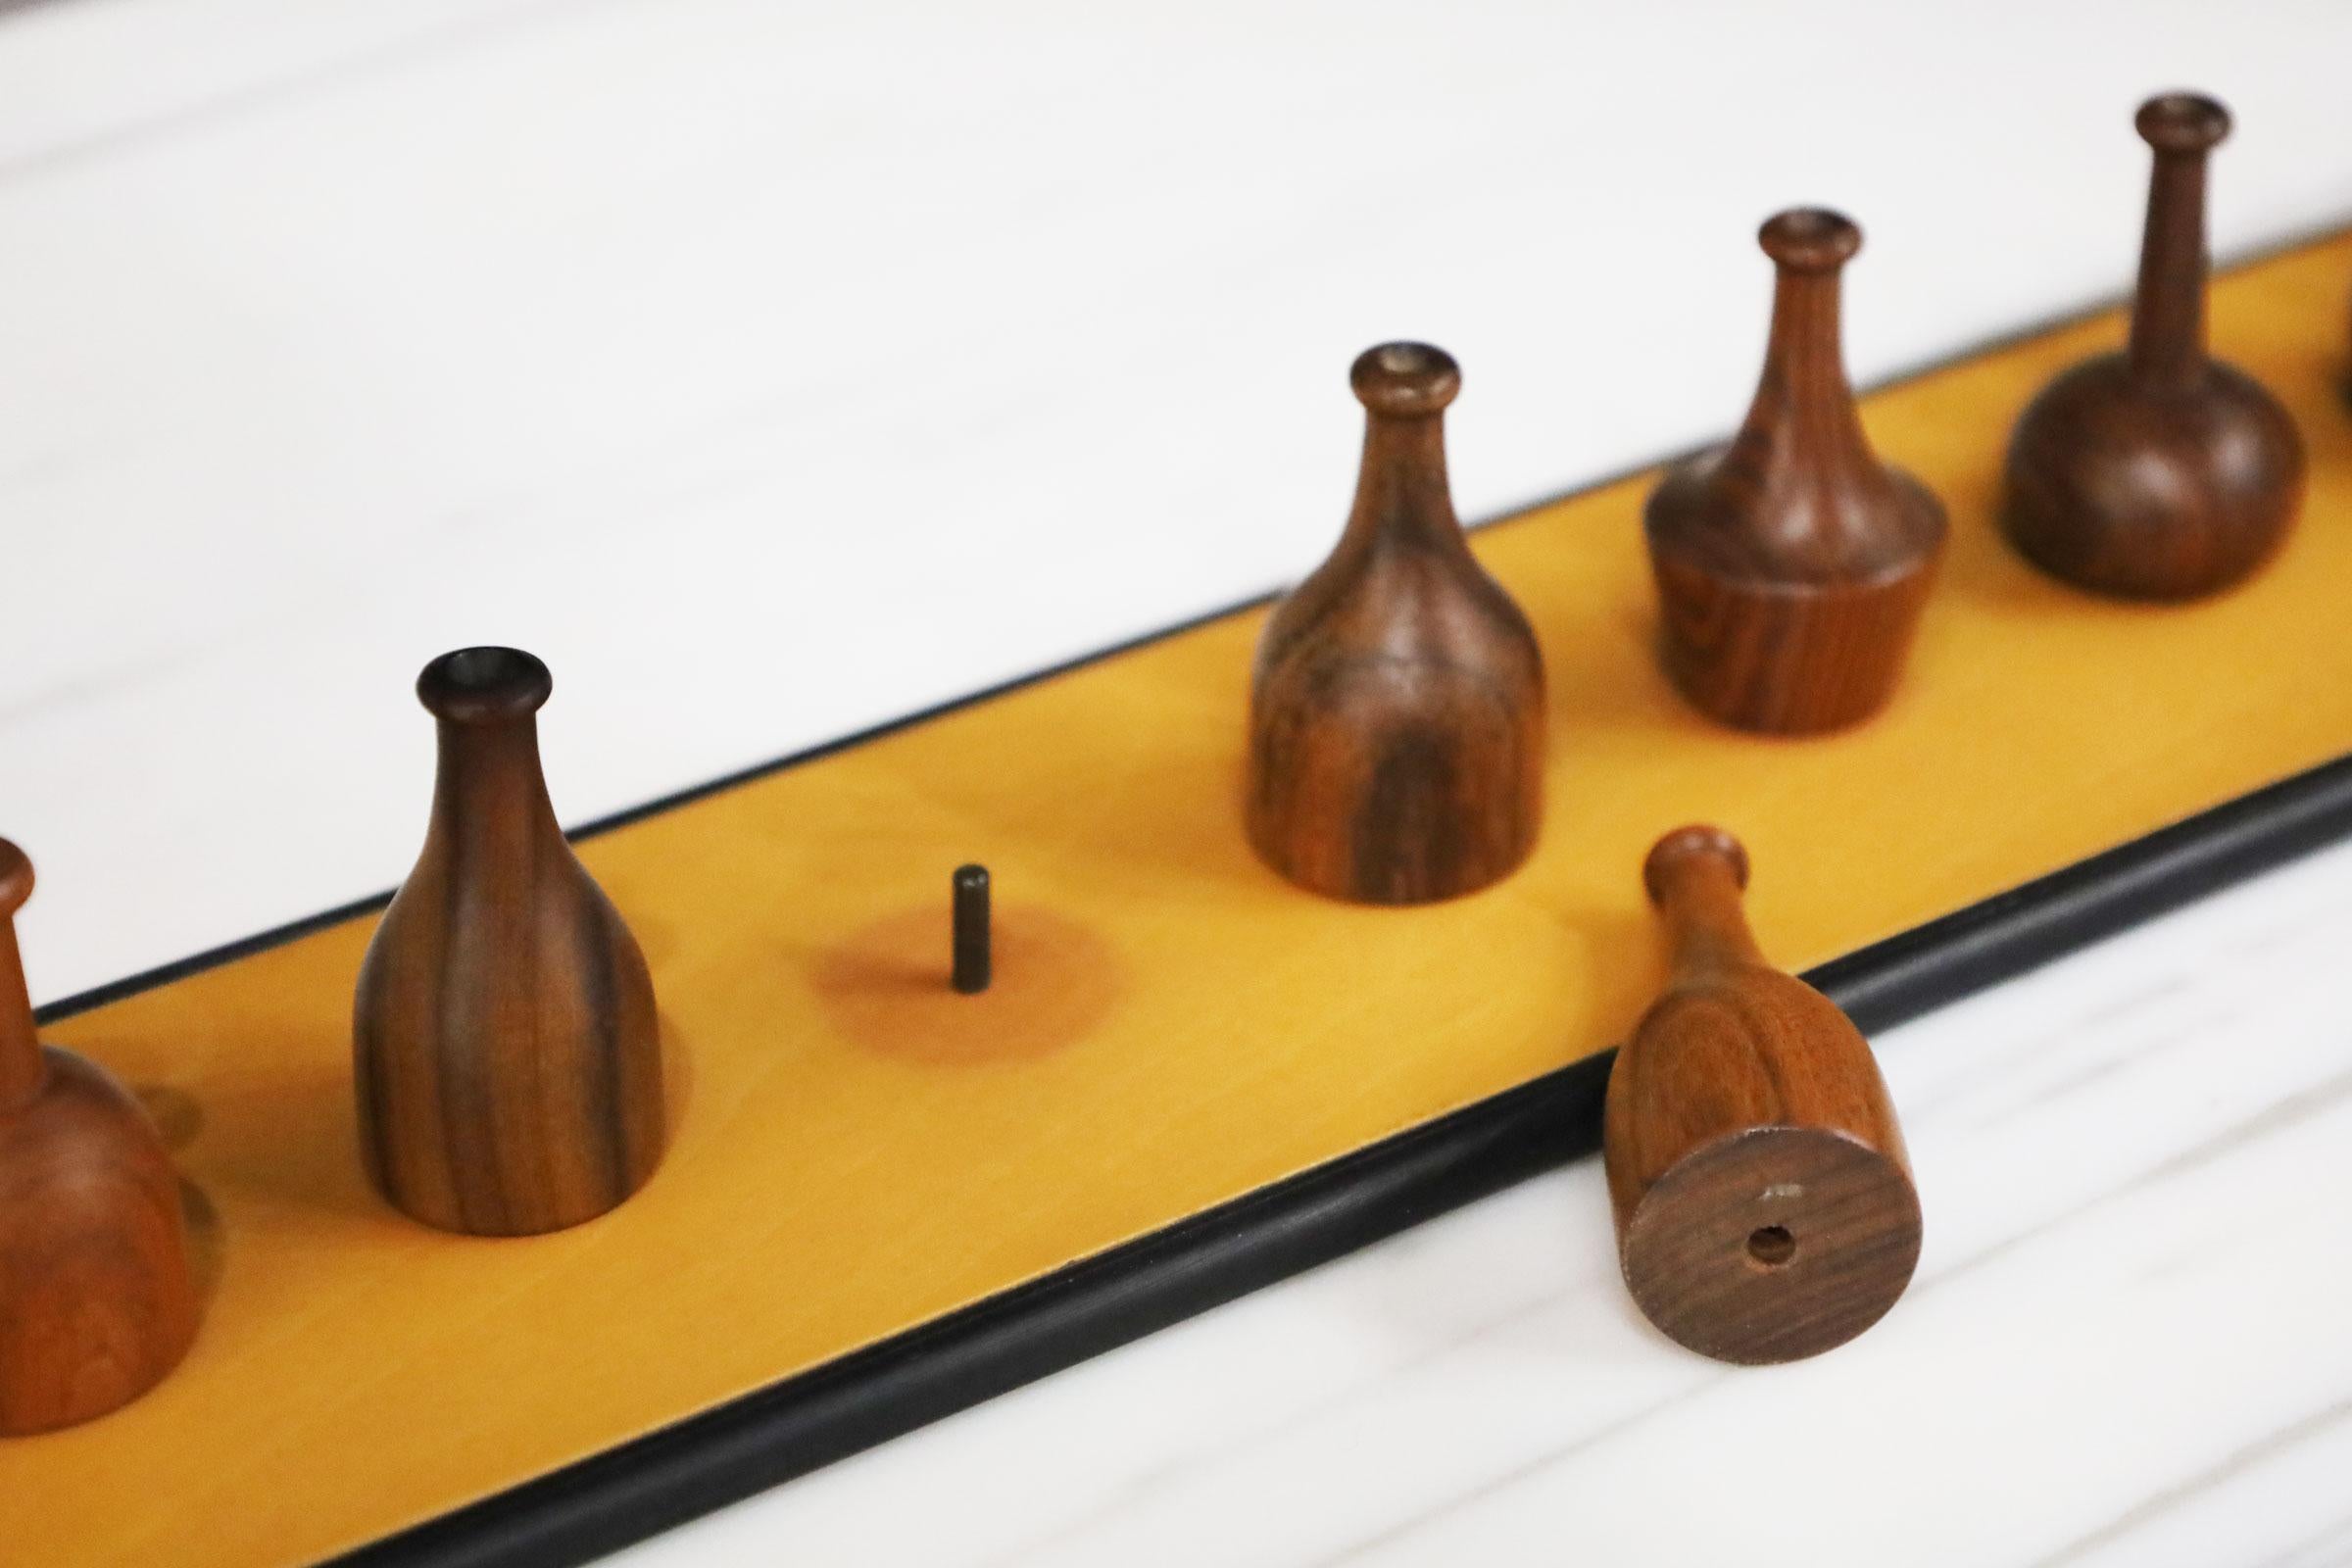 Mid-Century Modern Giorgio Pizzitutti Exotic Wood Miniature Vases Sculpture Italy 1980's For Sale